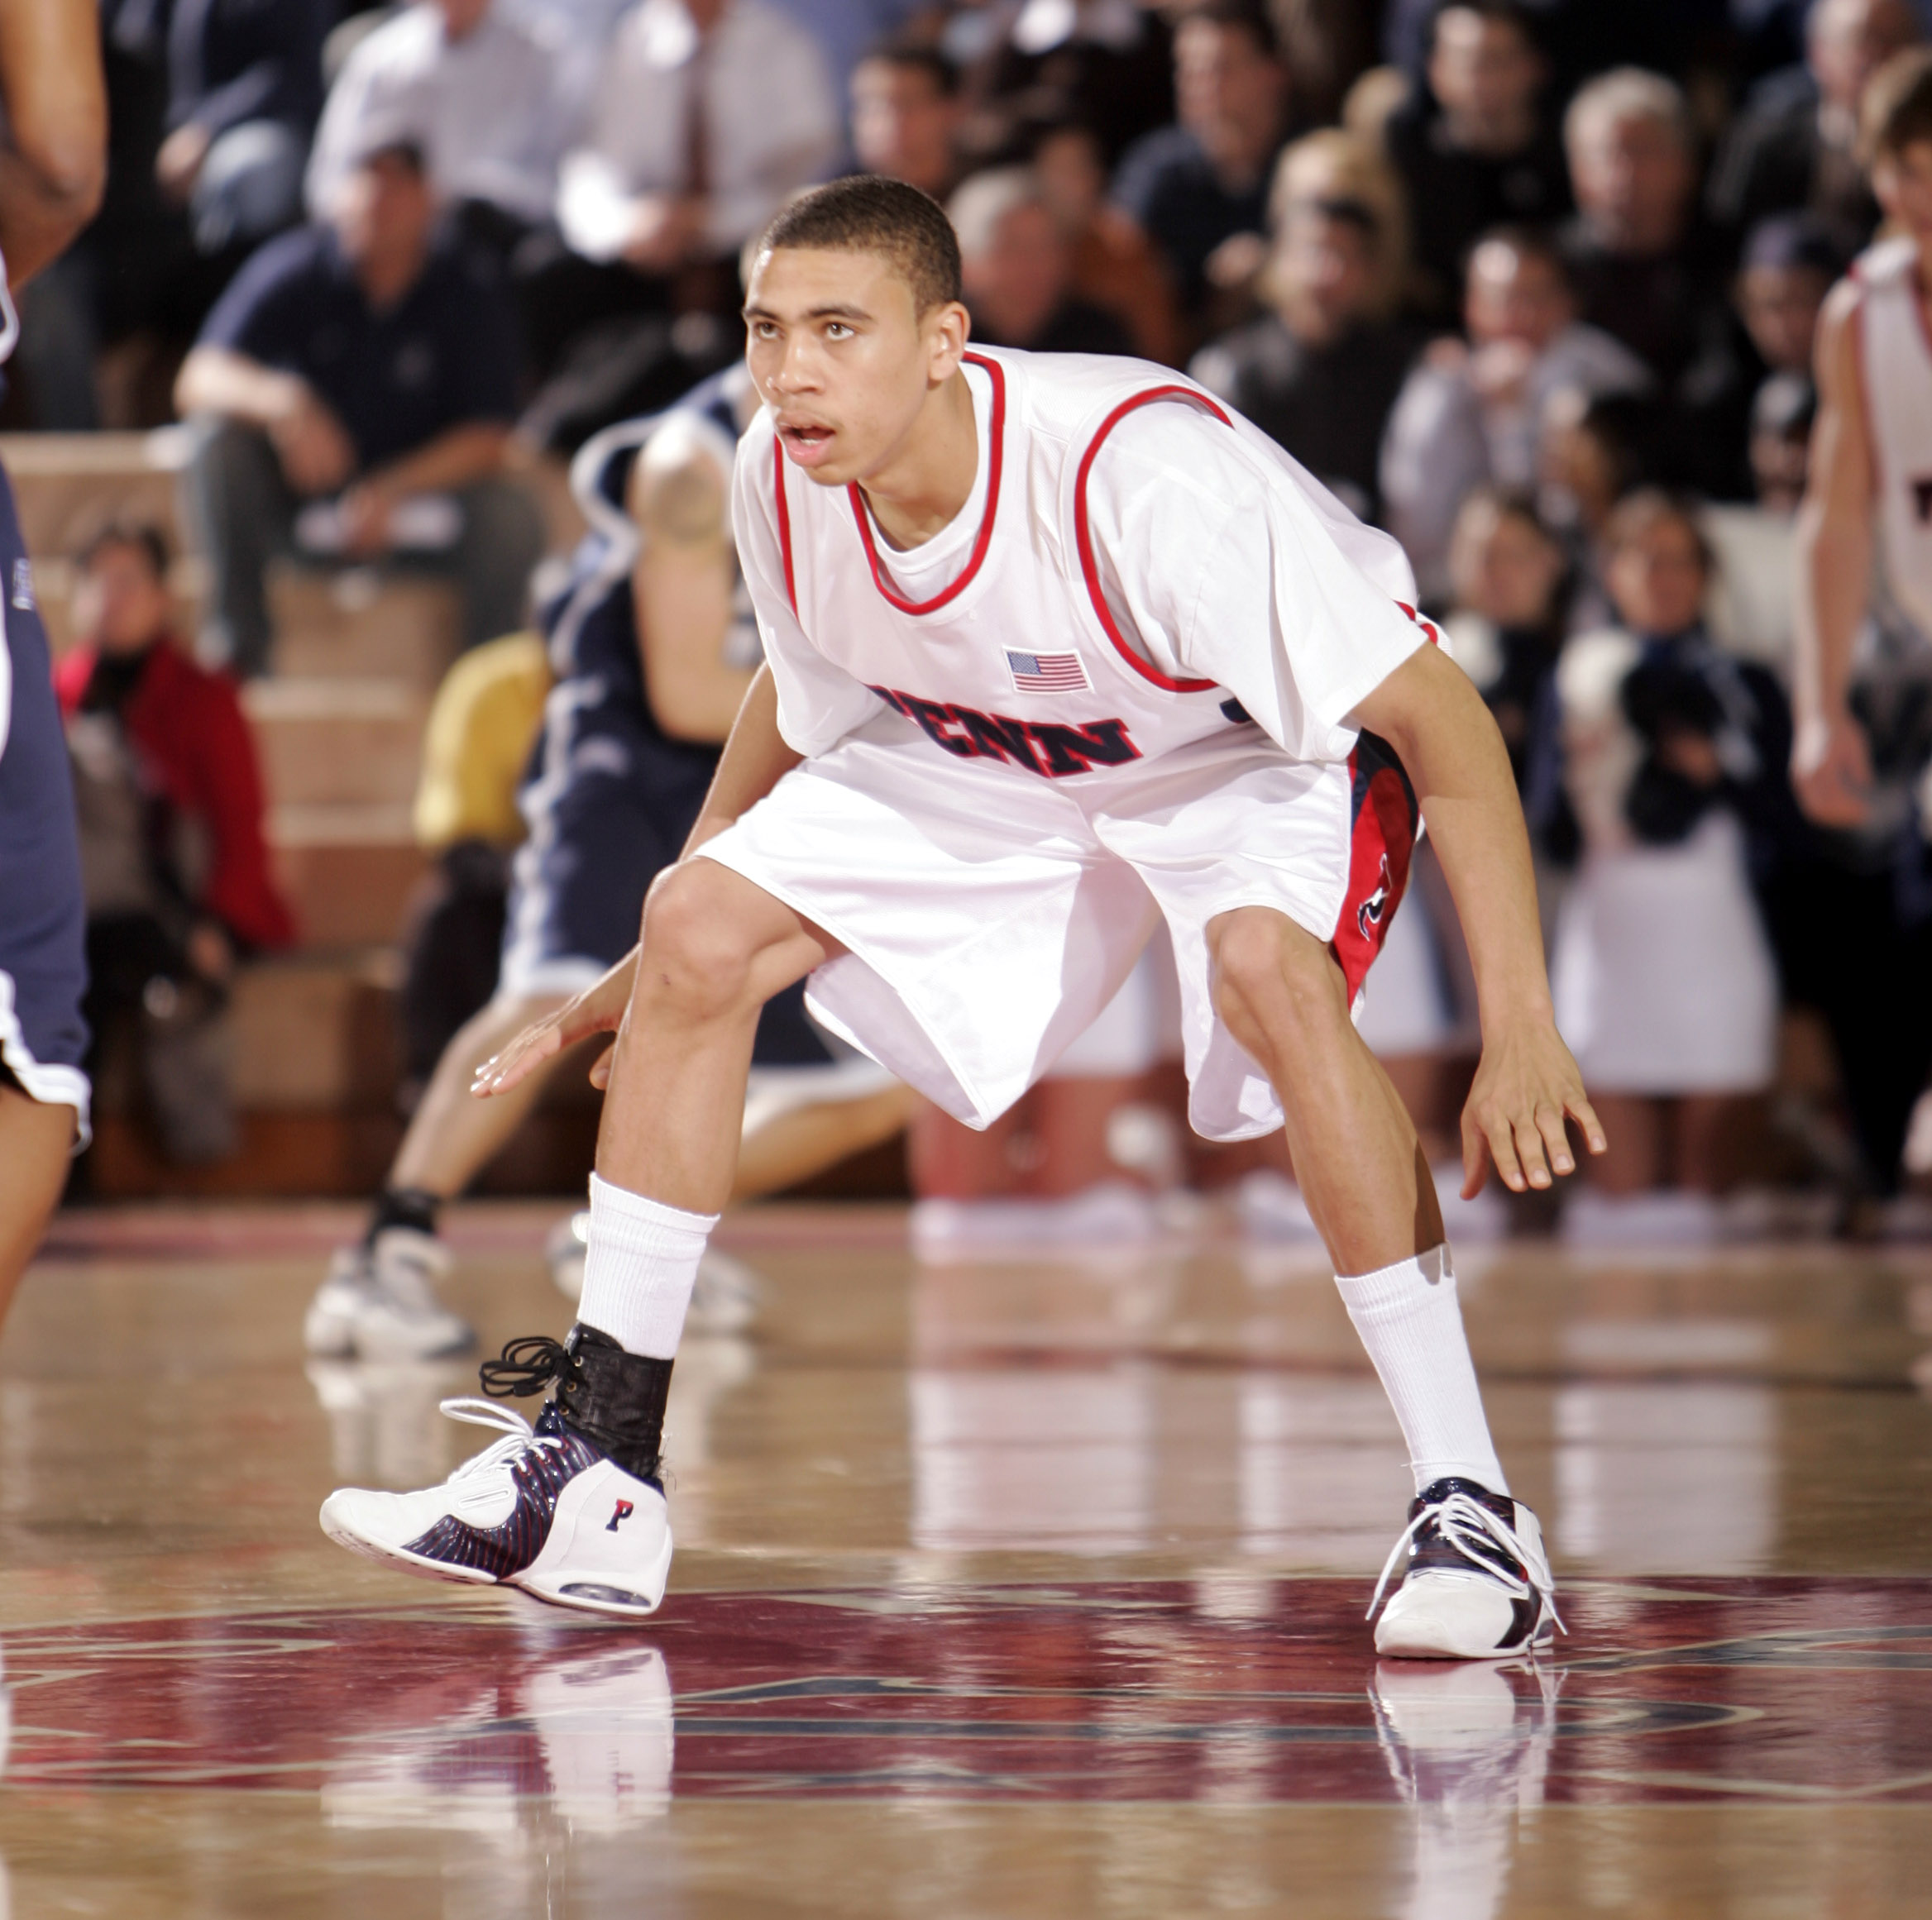 Ibrahim Jaaber plays defense against a defender at home at the Palestra.